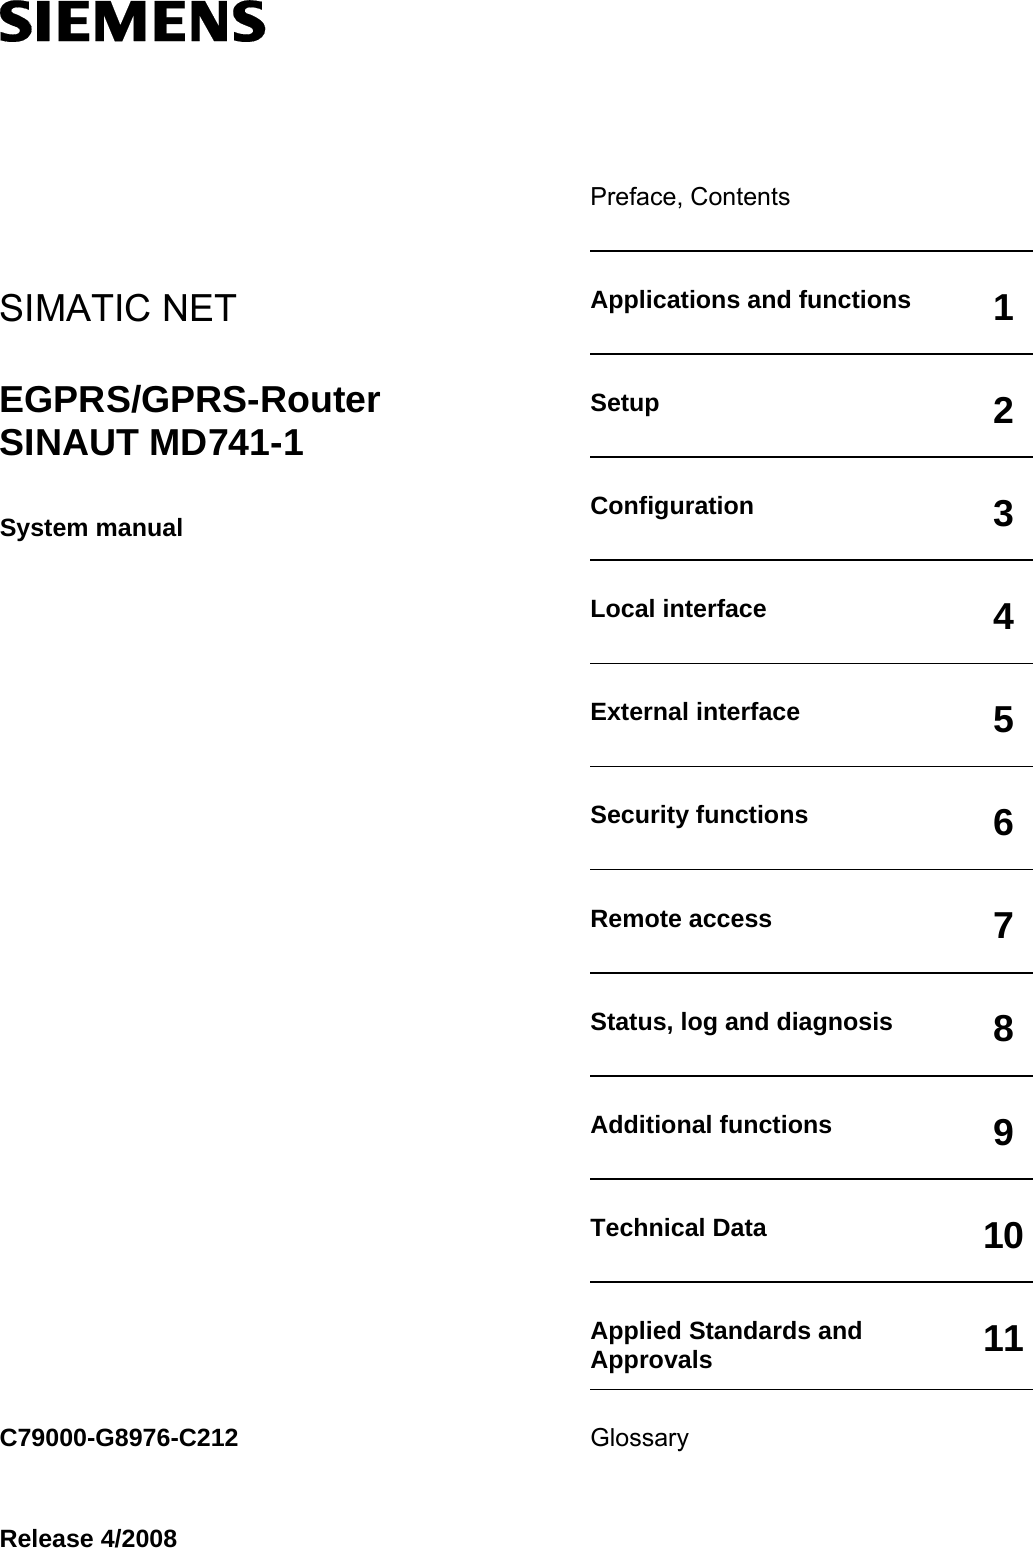   SIMATIC NET EGPRS/GPRS-Router  SINAUT MD741-1 System manual                         Preface, Contents   Applications and functions  1Setup  2Configuration  3Local interface  4External interface  5Security functions  6Remote access  7Status, log and diagnosis  8Additional functions  9Technical Data  10Applied Standards and Approvals  11Glossary       C79000-G8976-C212 Release 4/2008 